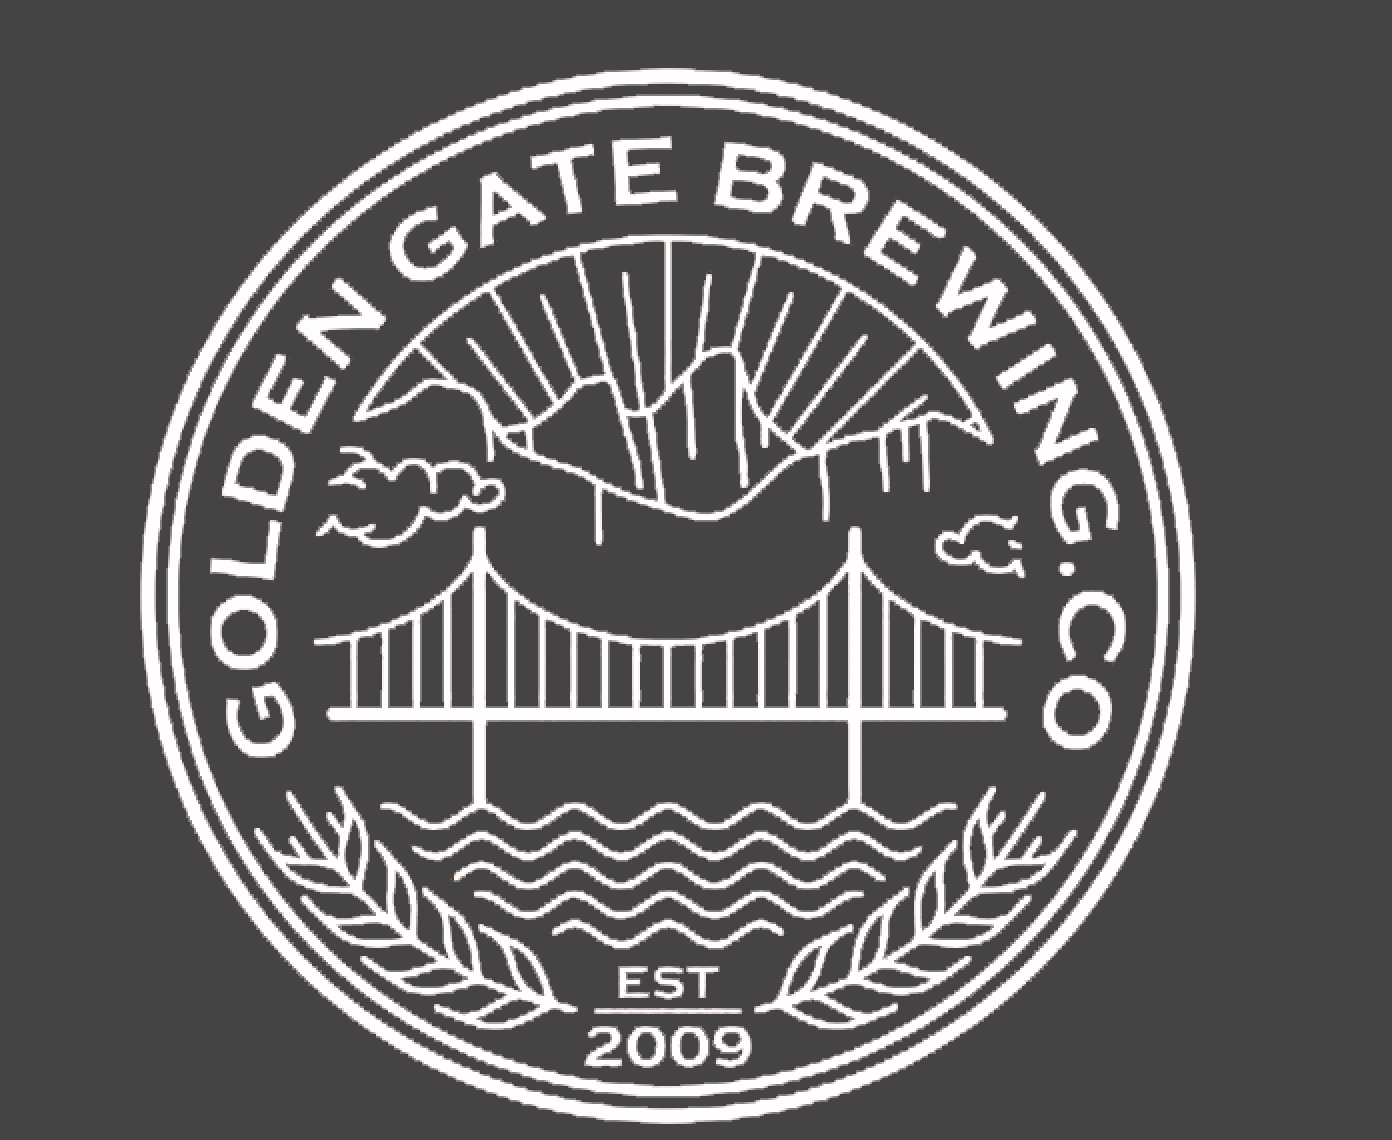 Golden Gate Brewing Company -